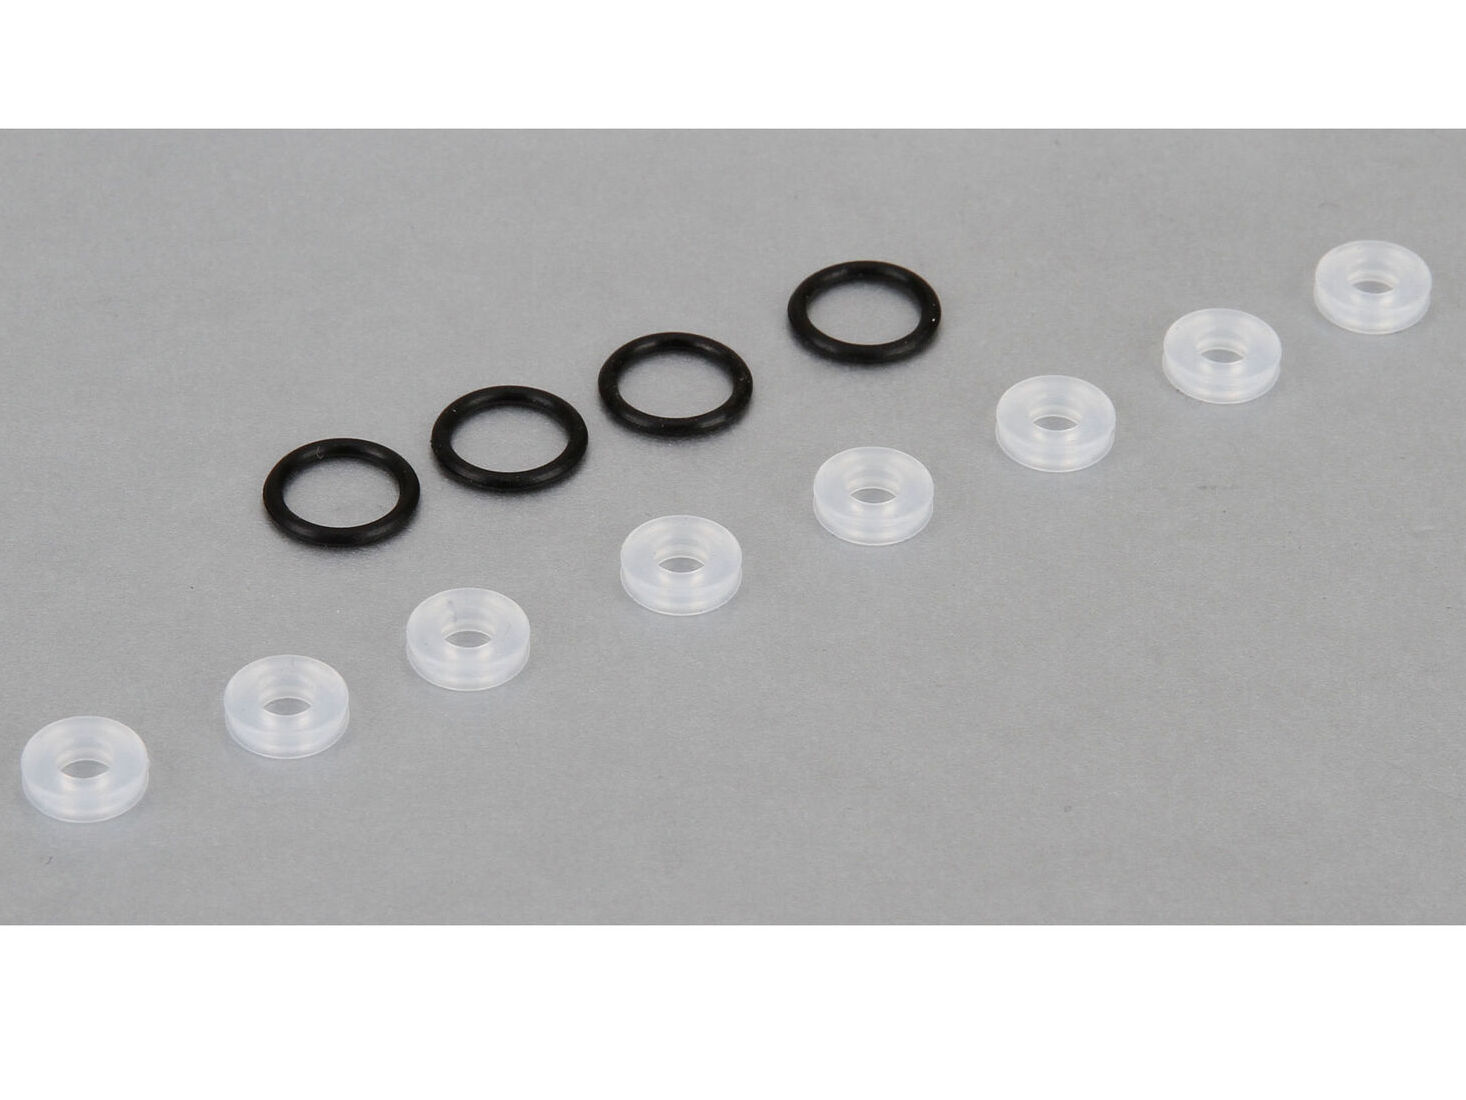 TLR 243024 - X-Ring Seals (8), Lower Cap Seals (All 8IGHT)